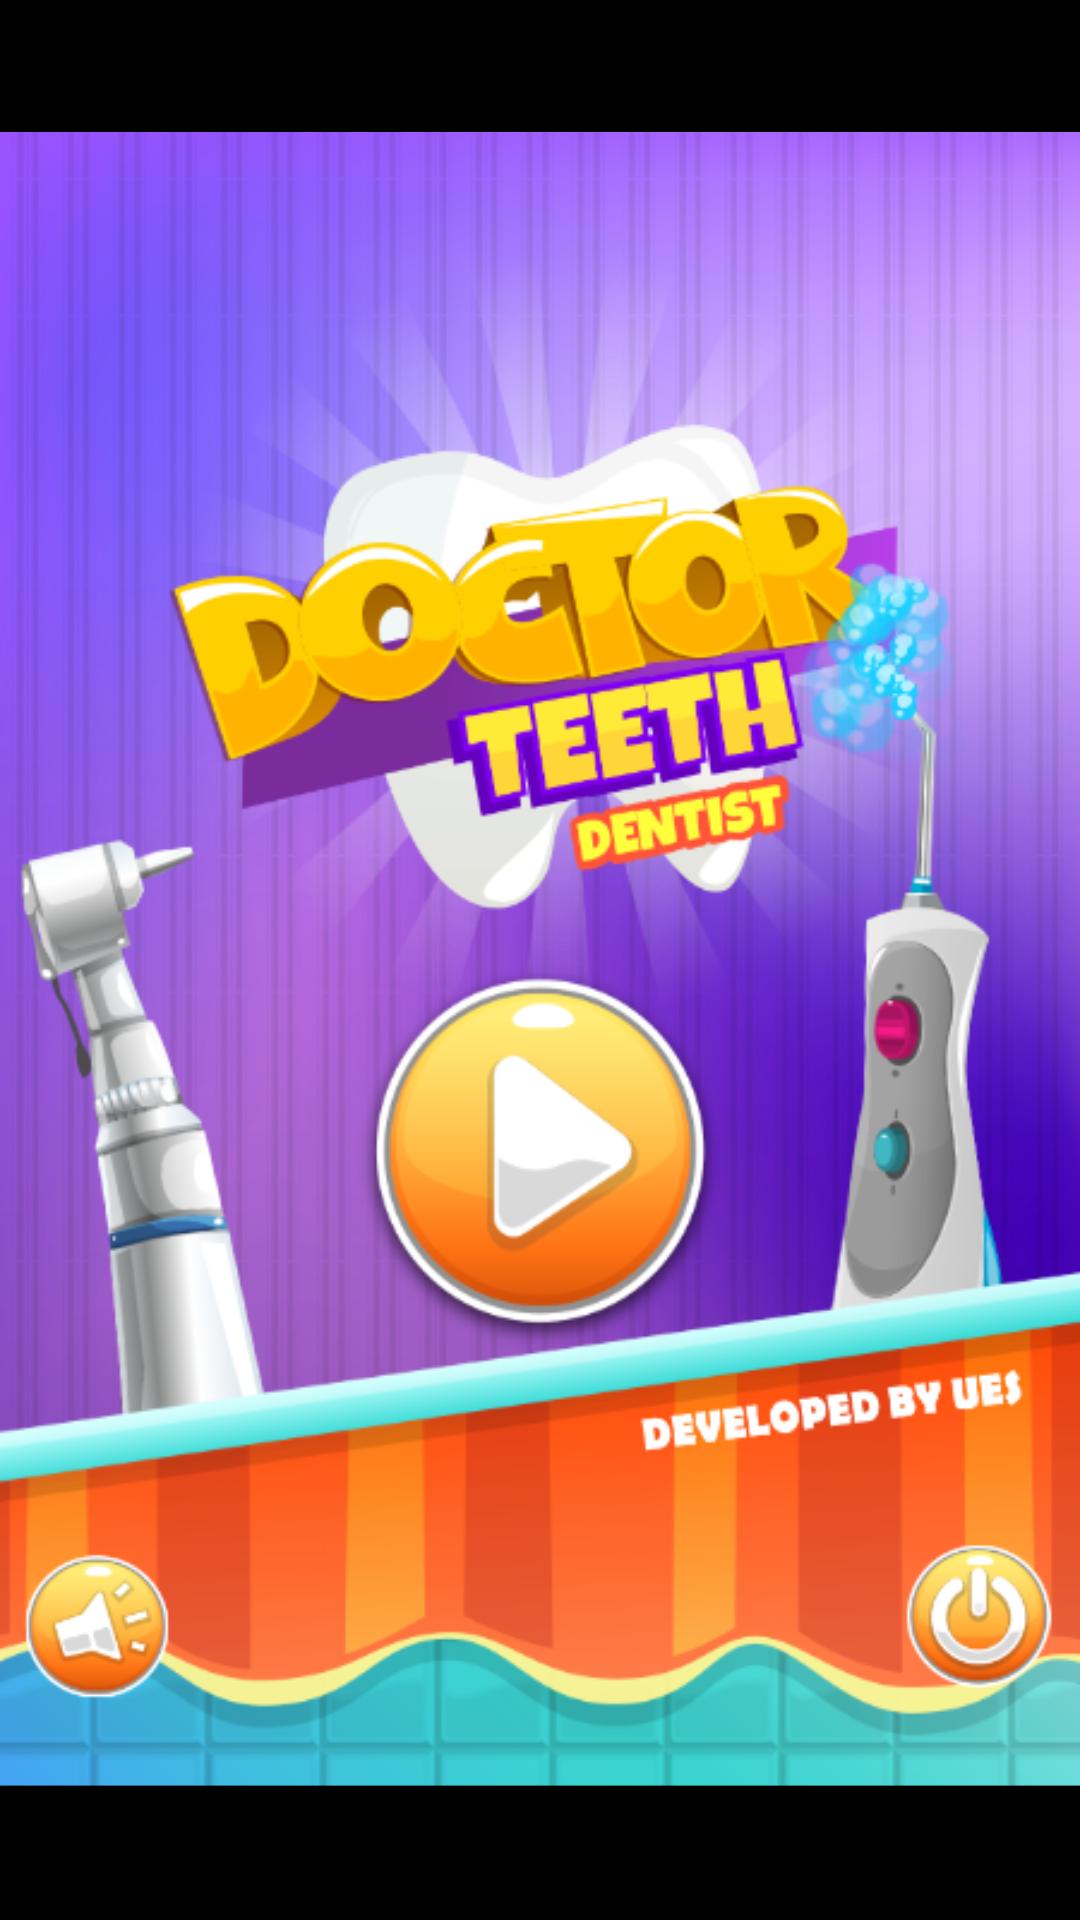 Dr Teeth The Dentist For Android Apk Download